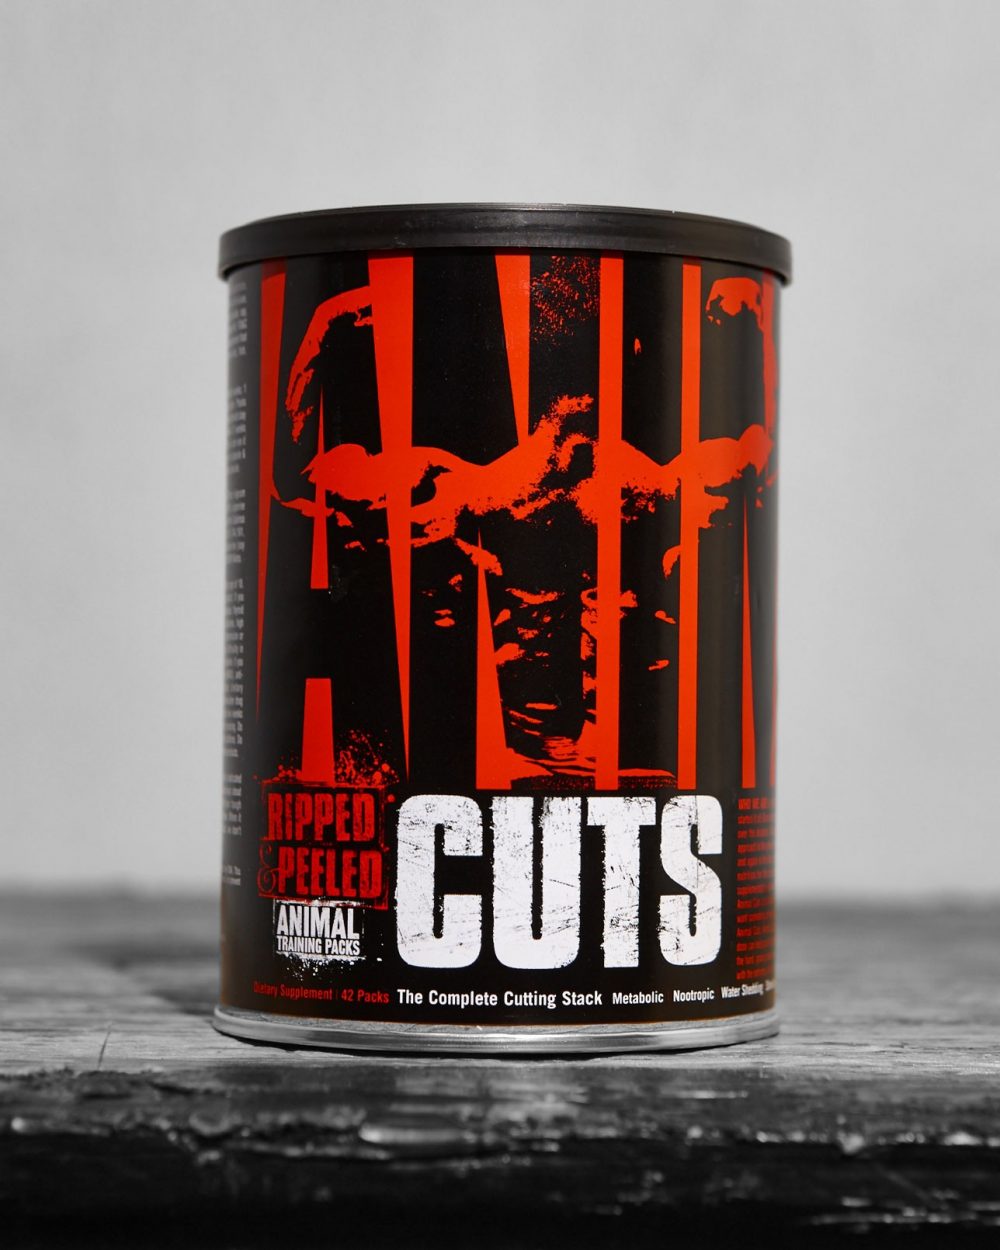 Animal Cuts Review: Will it Really Help You Reach Goals in the Gym?